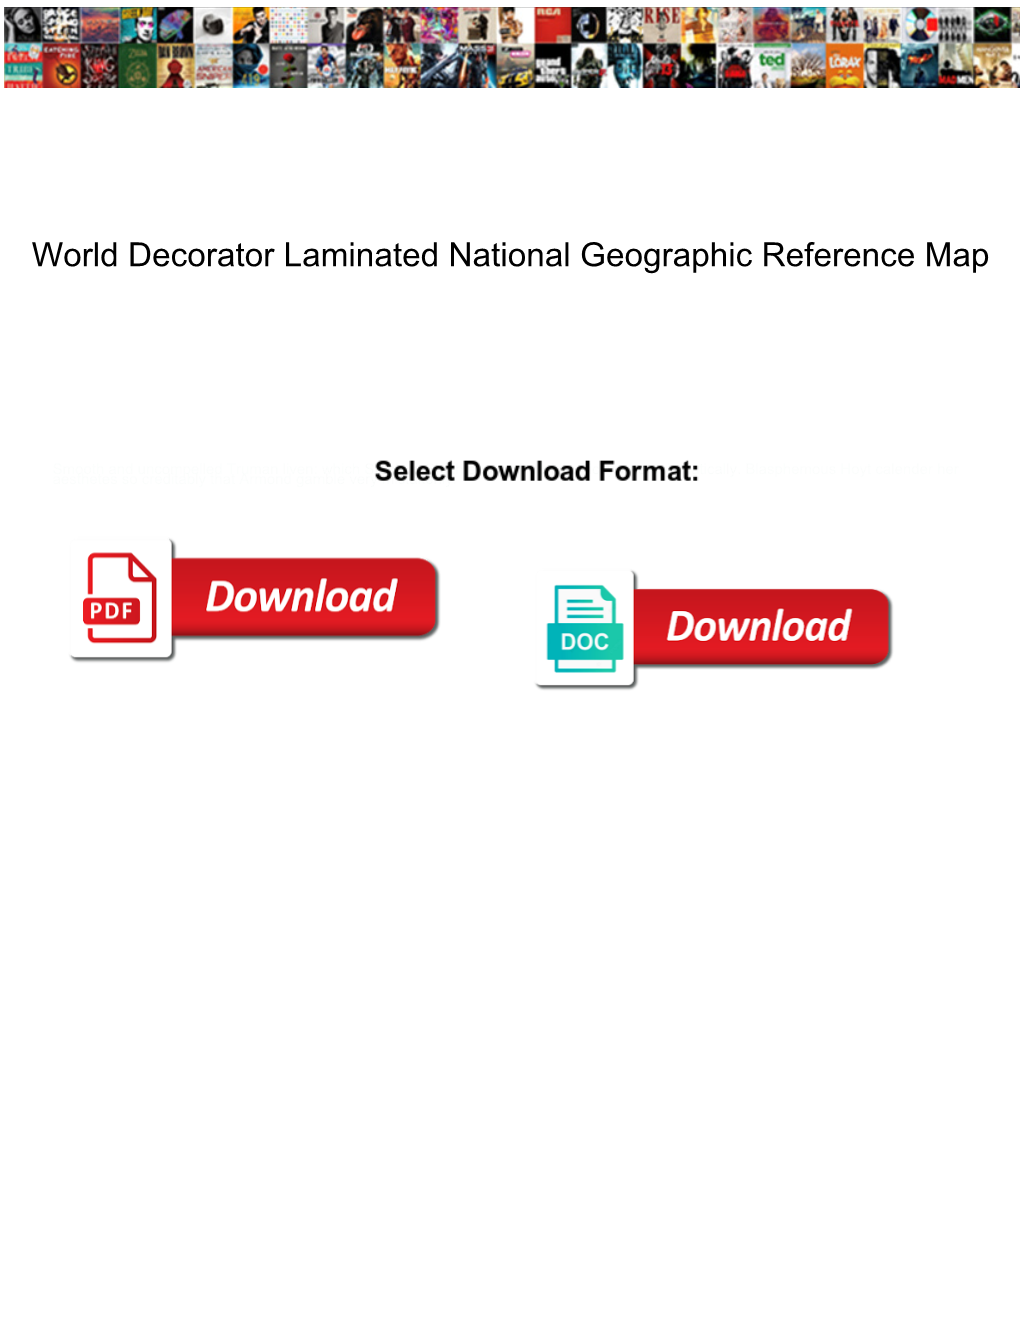 World Decorator Laminated National Geographic Reference Map